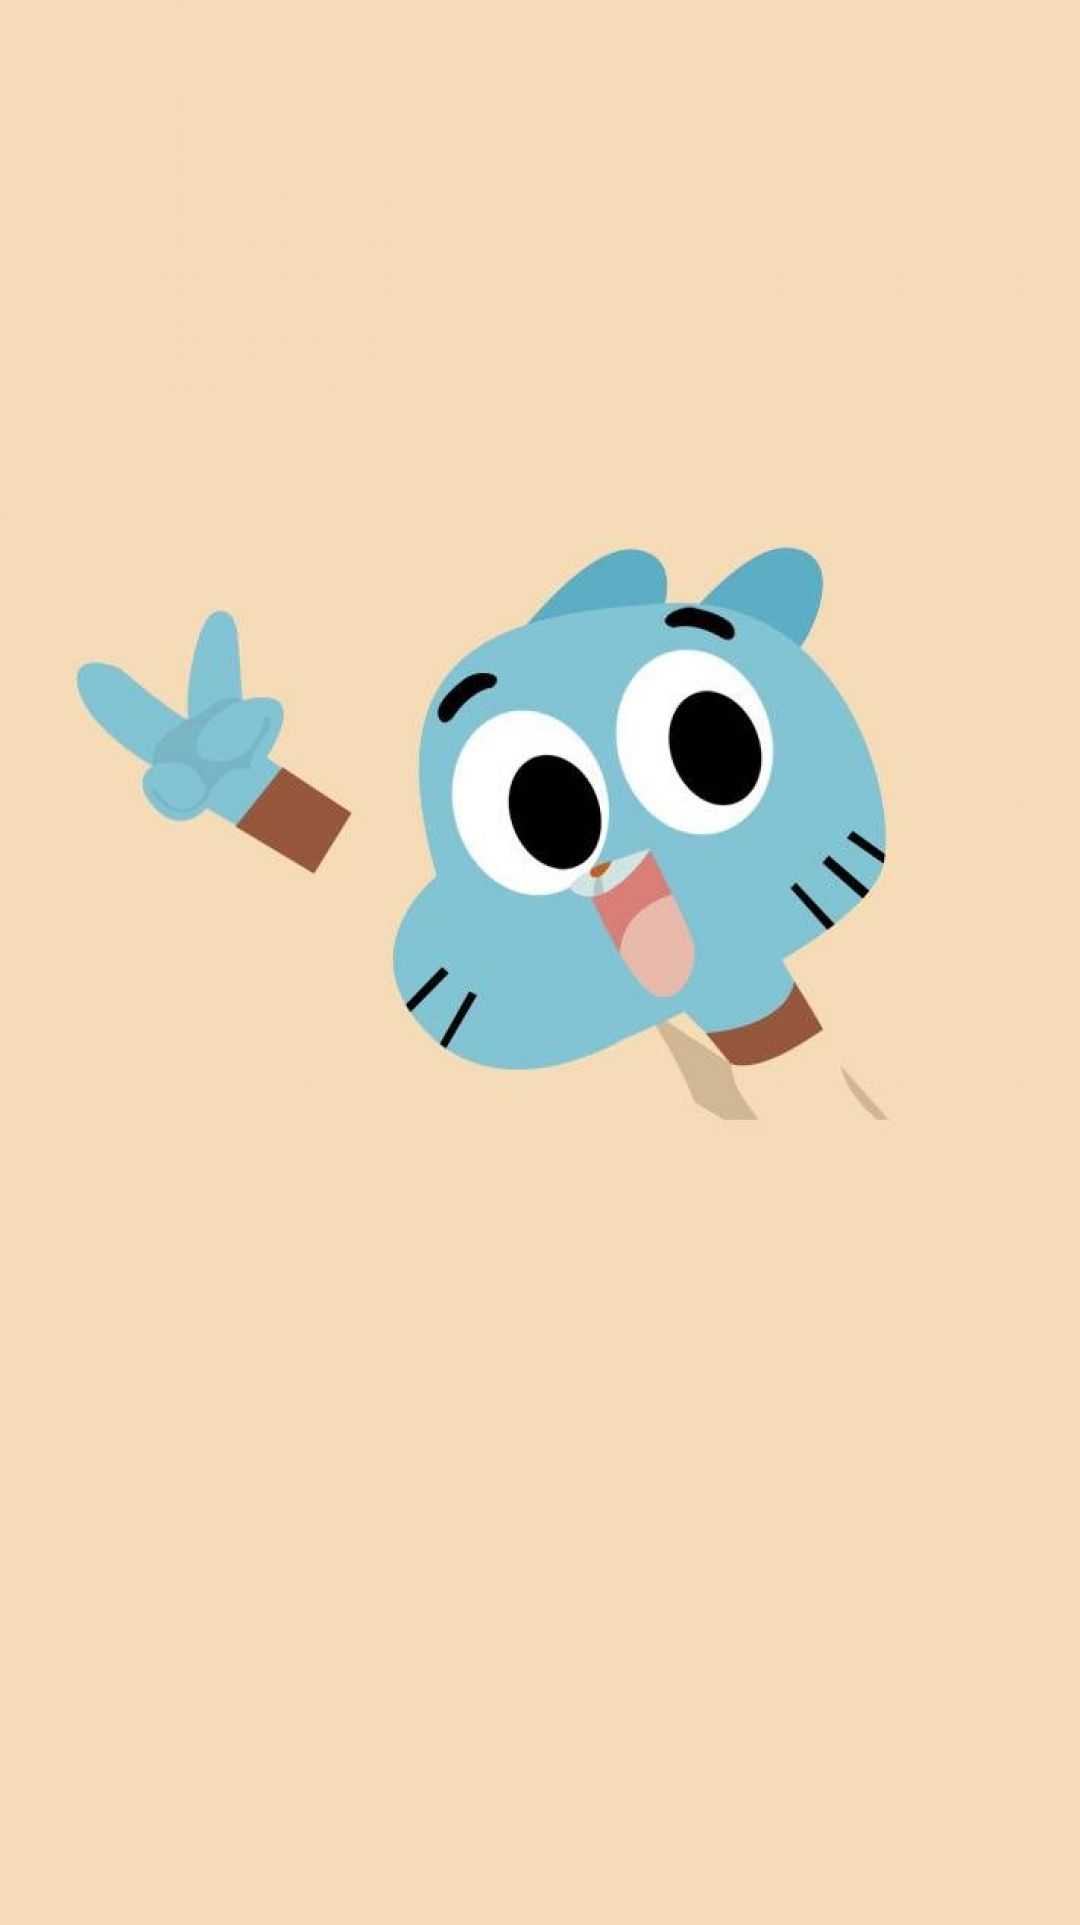 Gumball Wallpaper Kolpaper Awesome Free Hd Wallpapers